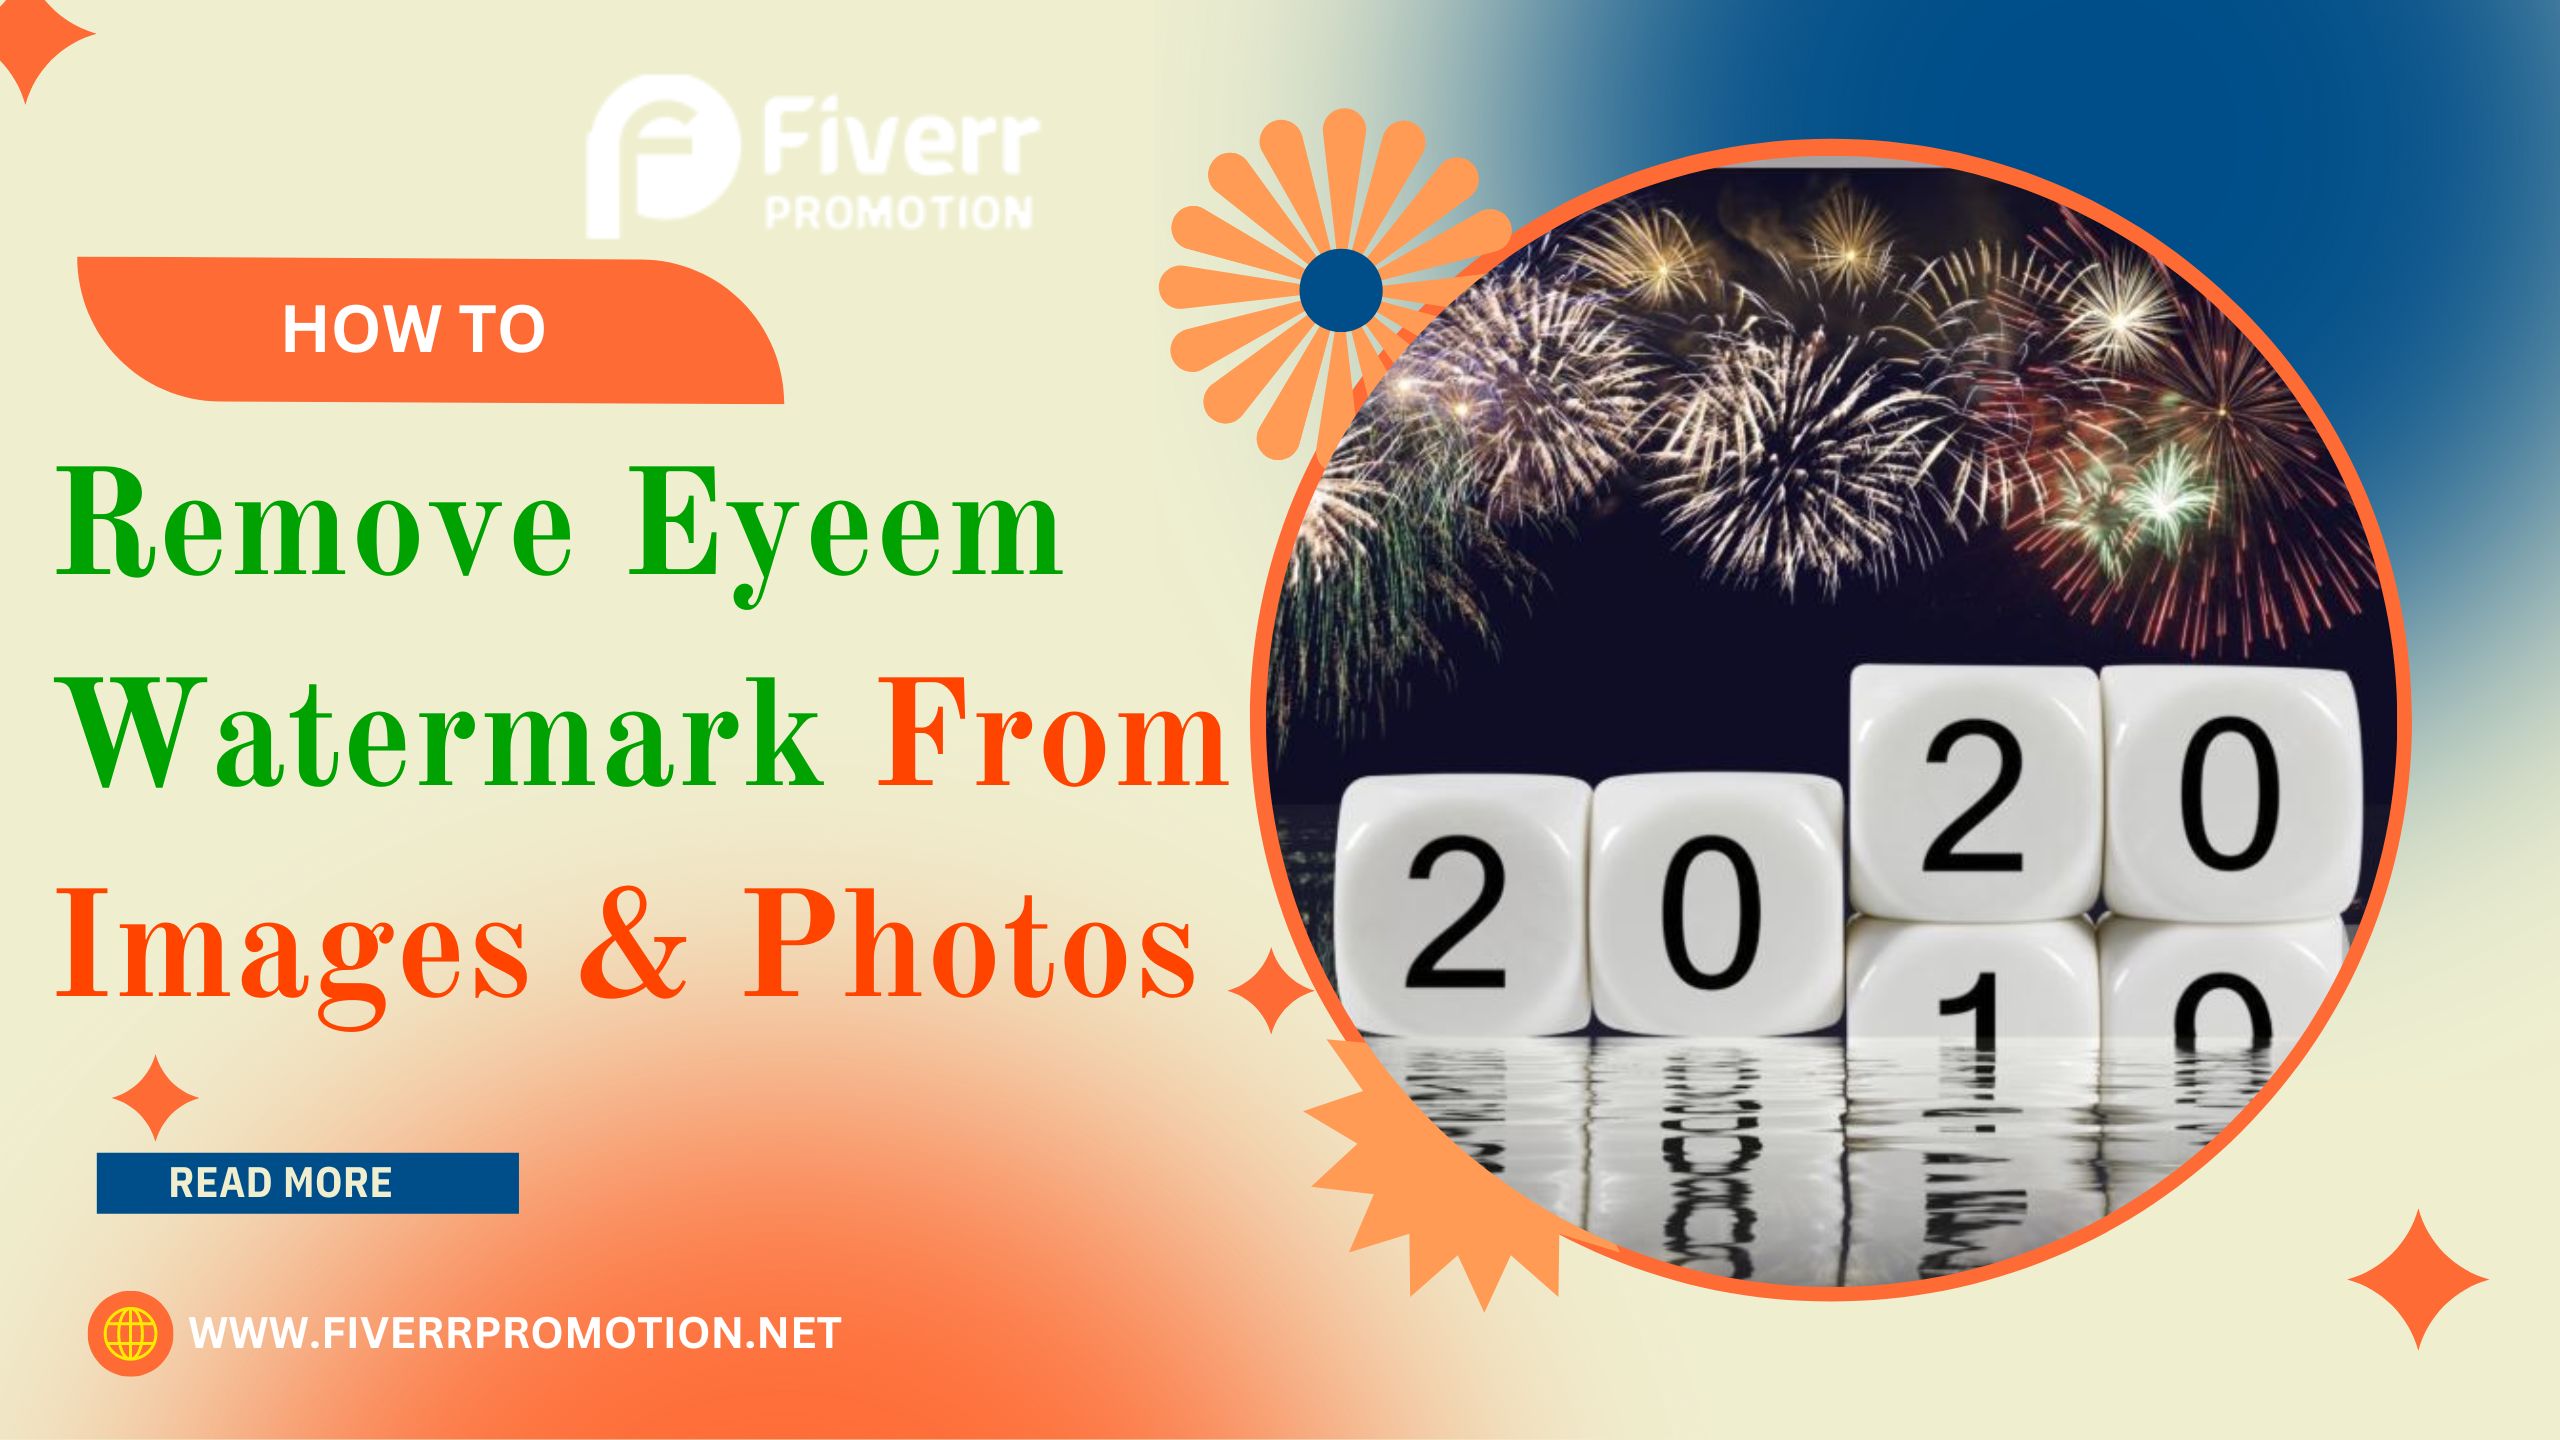 How to Remove Eyeem Watermark from Images & Photos